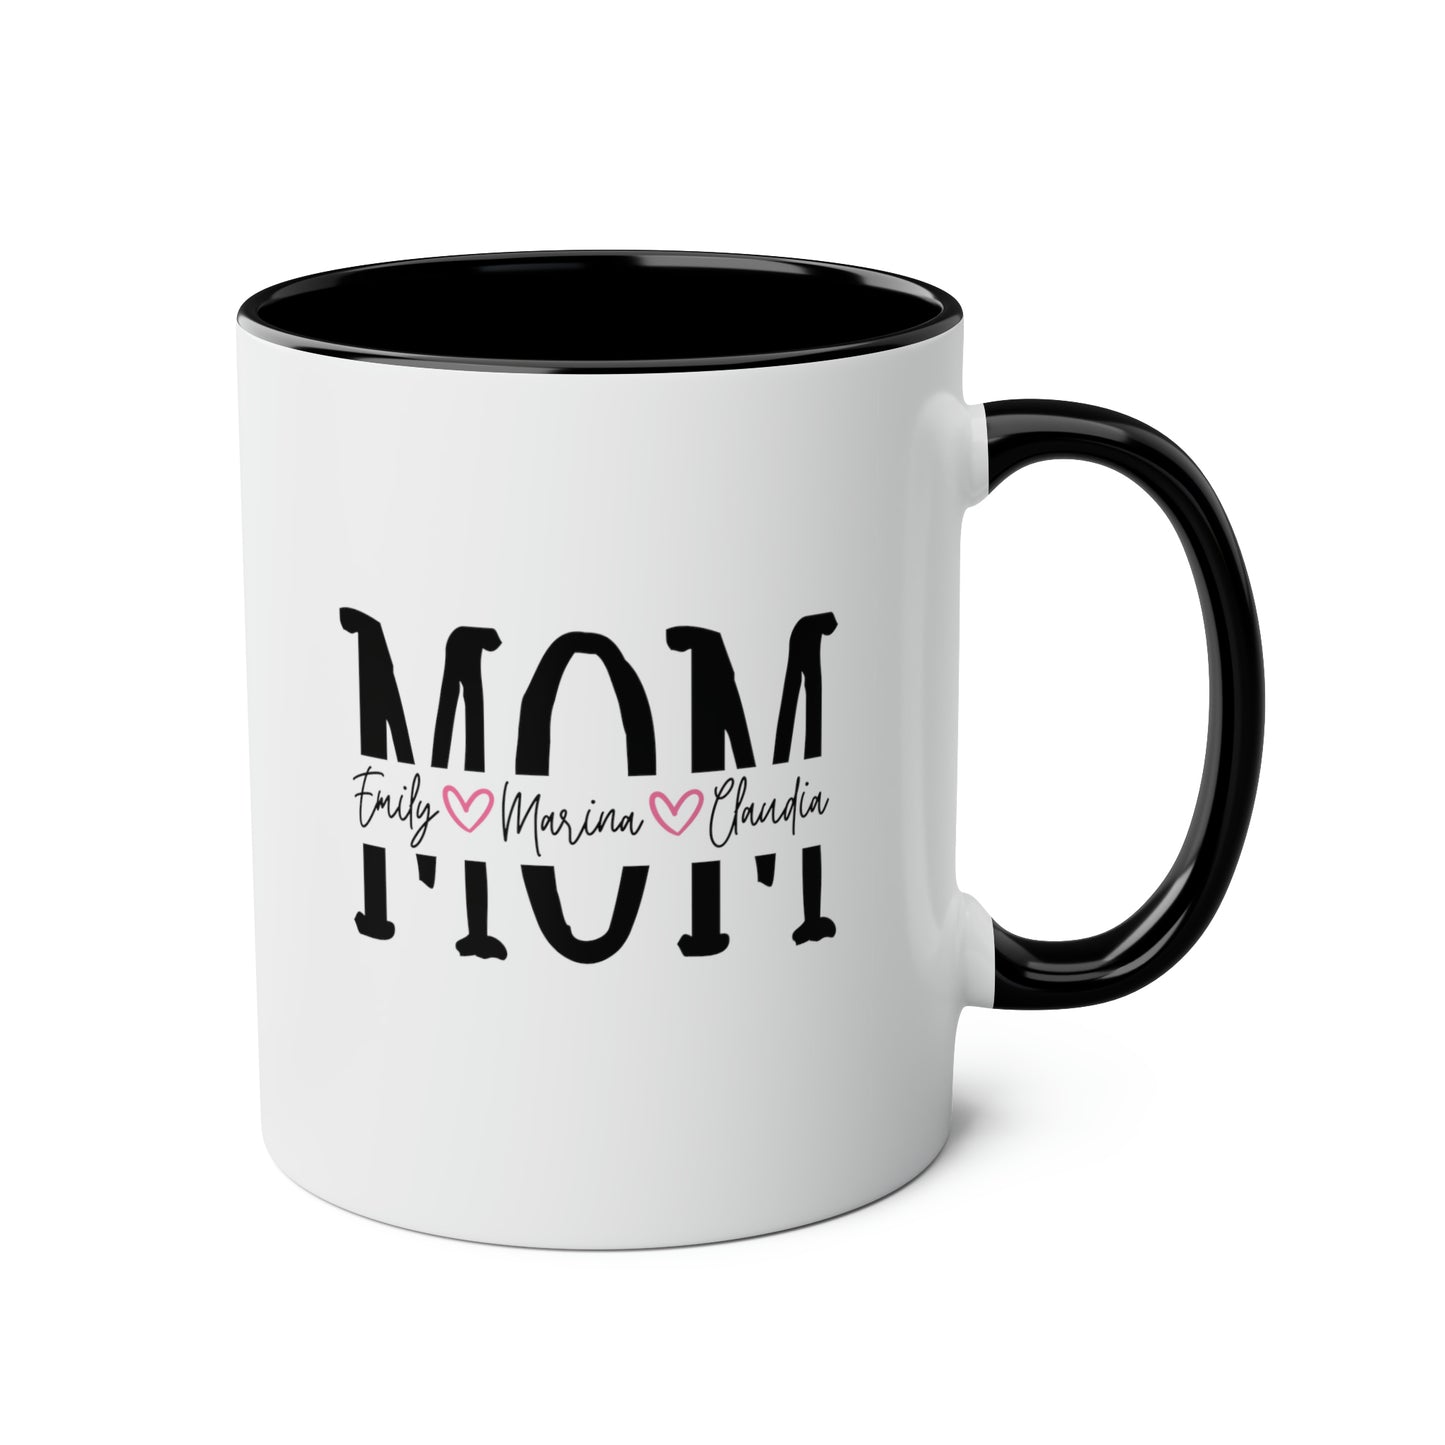 Mom With Kids' Names 11oz white with black accent funny large coffee mug gift for mother's day son daughter heart personalize custom waveywares wavey wares wavywares wavy wares